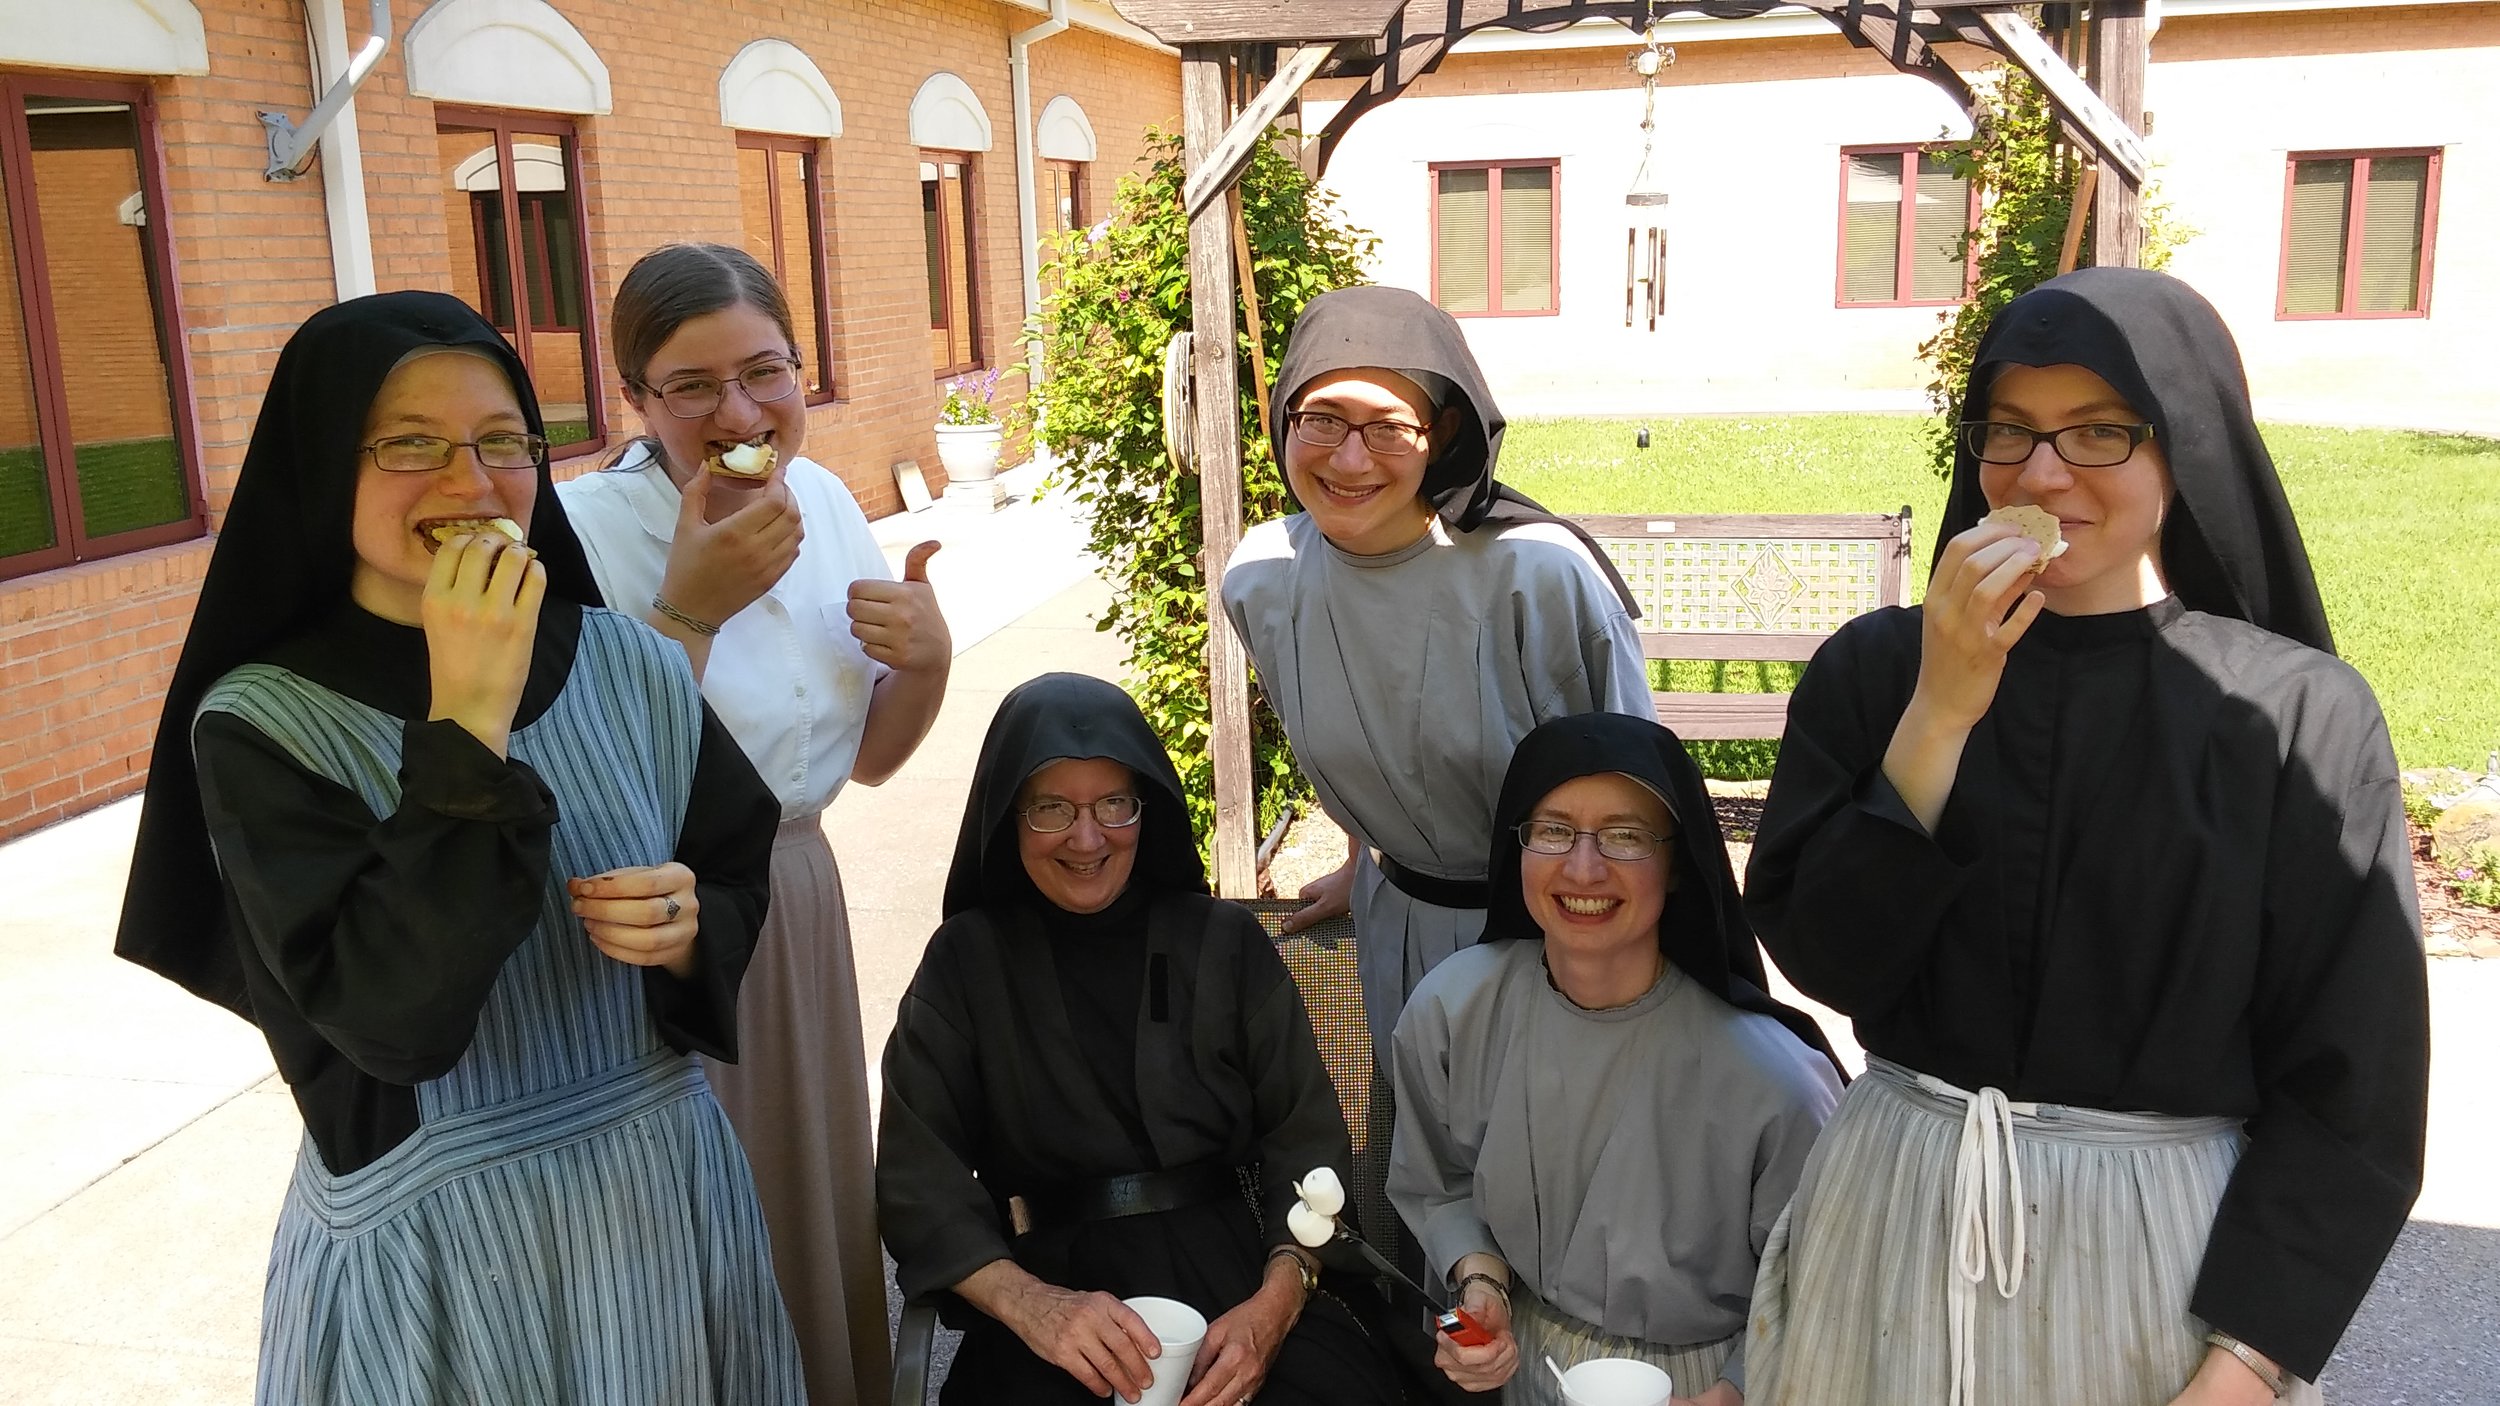  Sr. Frances Marie, Theresa, Sr. Mary Veronica, Sr. Lucia Marie, Sr. Cecilia Maria, and Sr. Maria Faustina enjoying some 4th of July s’mores 